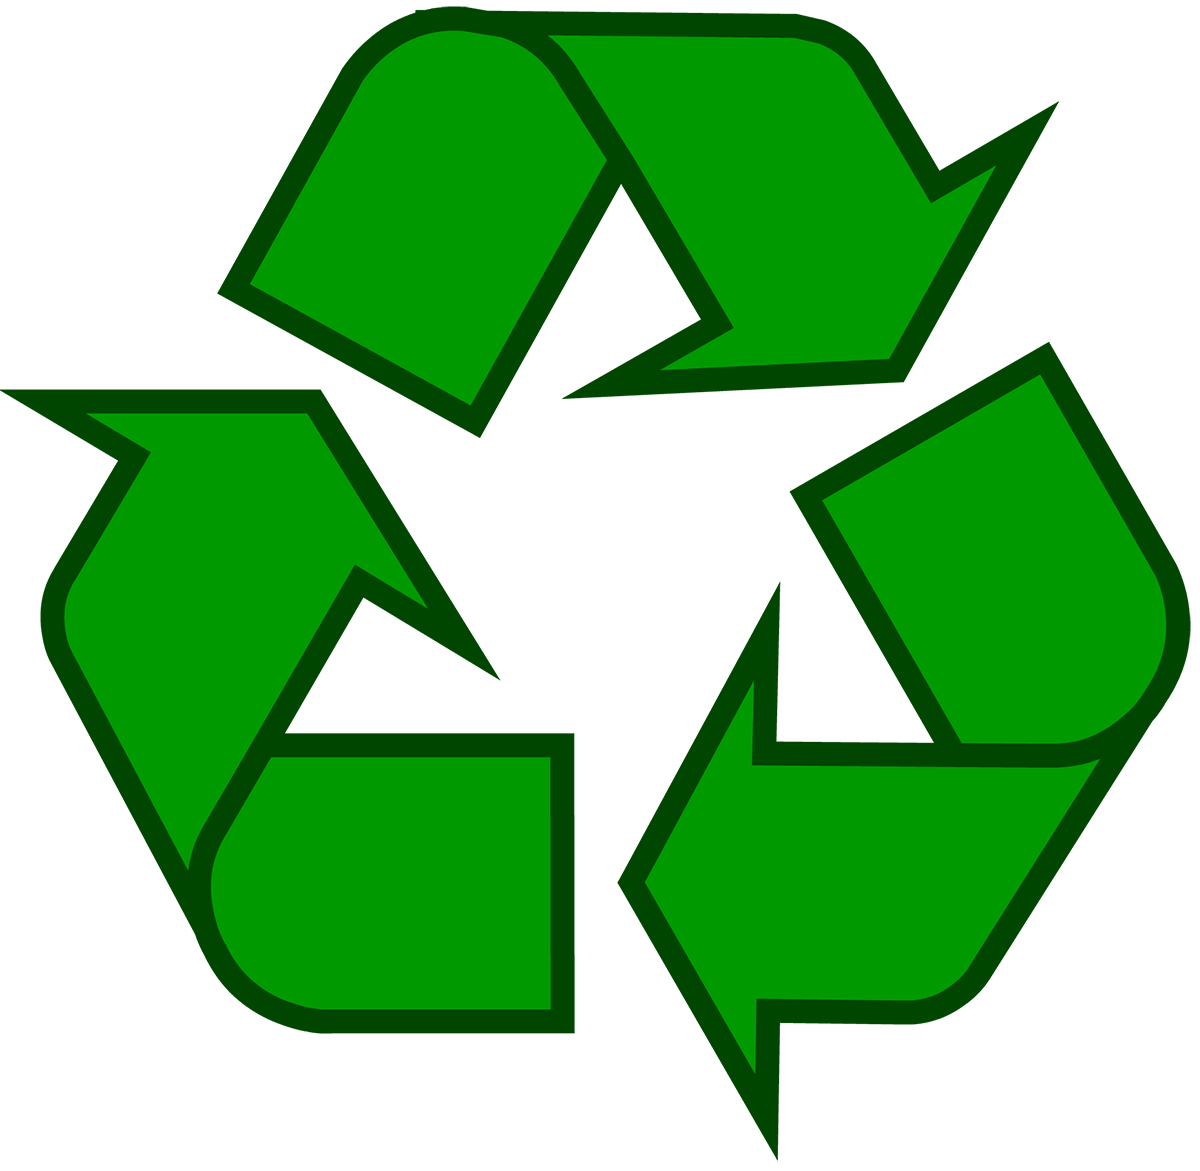 Recycling symbol download.